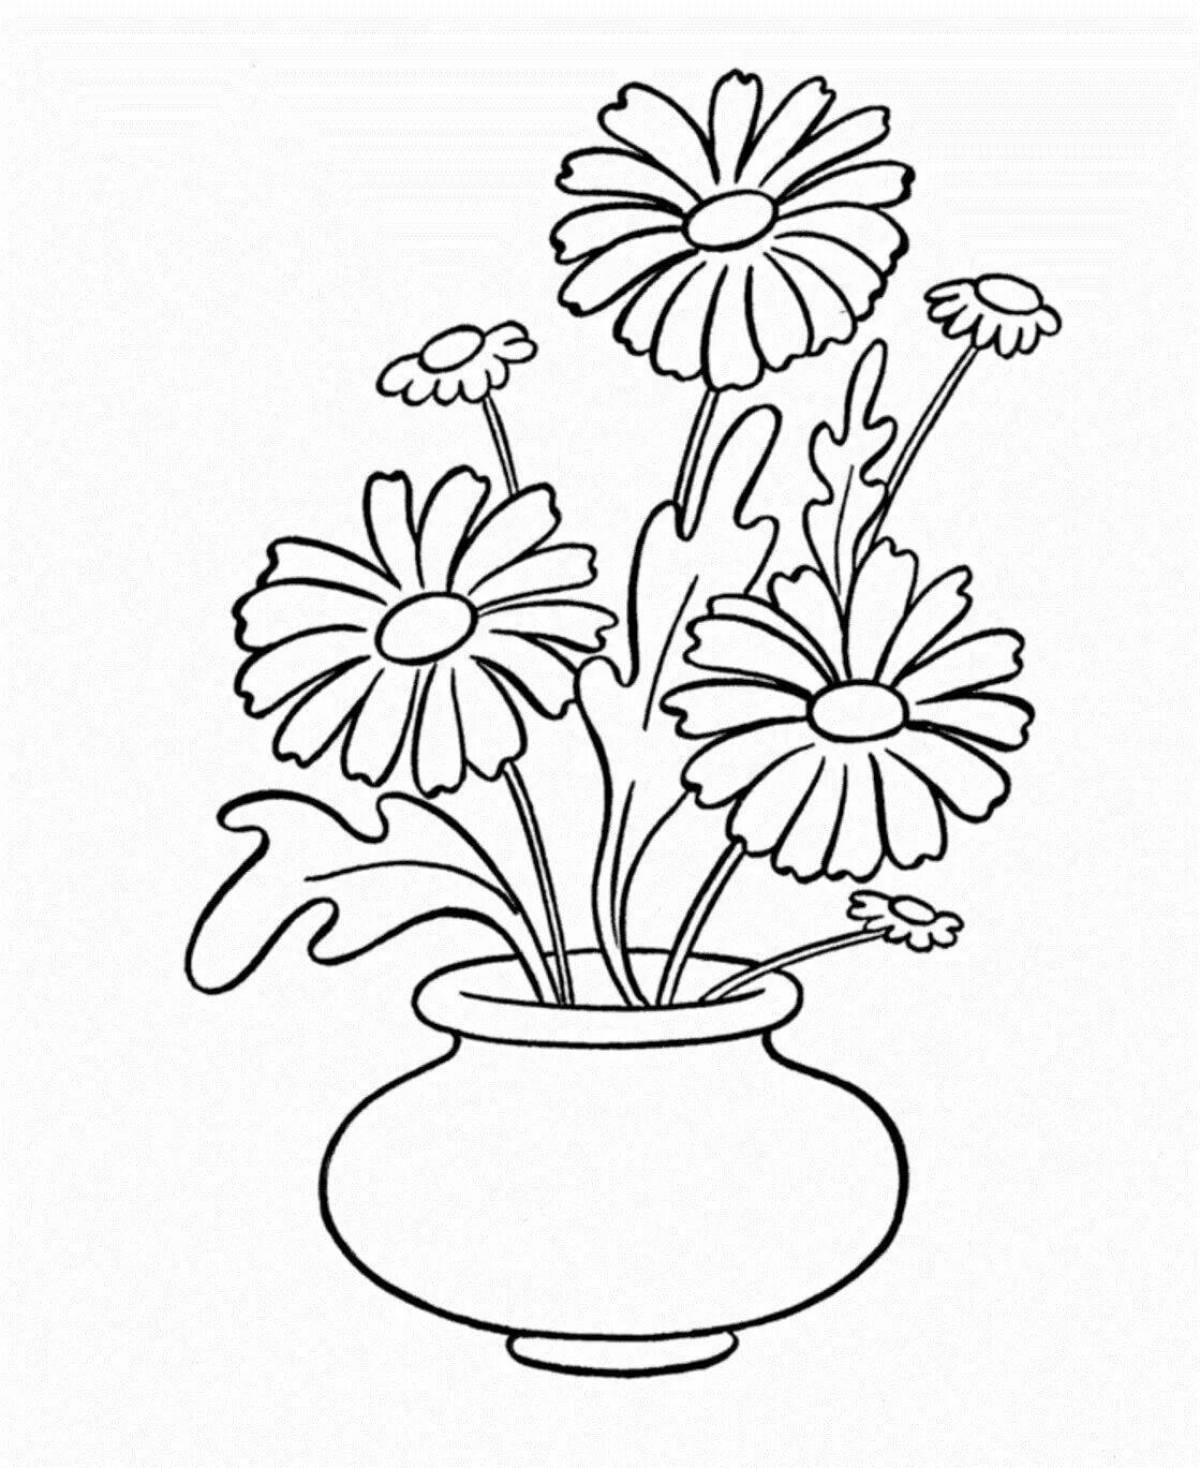 Playful coloring flowers for mom